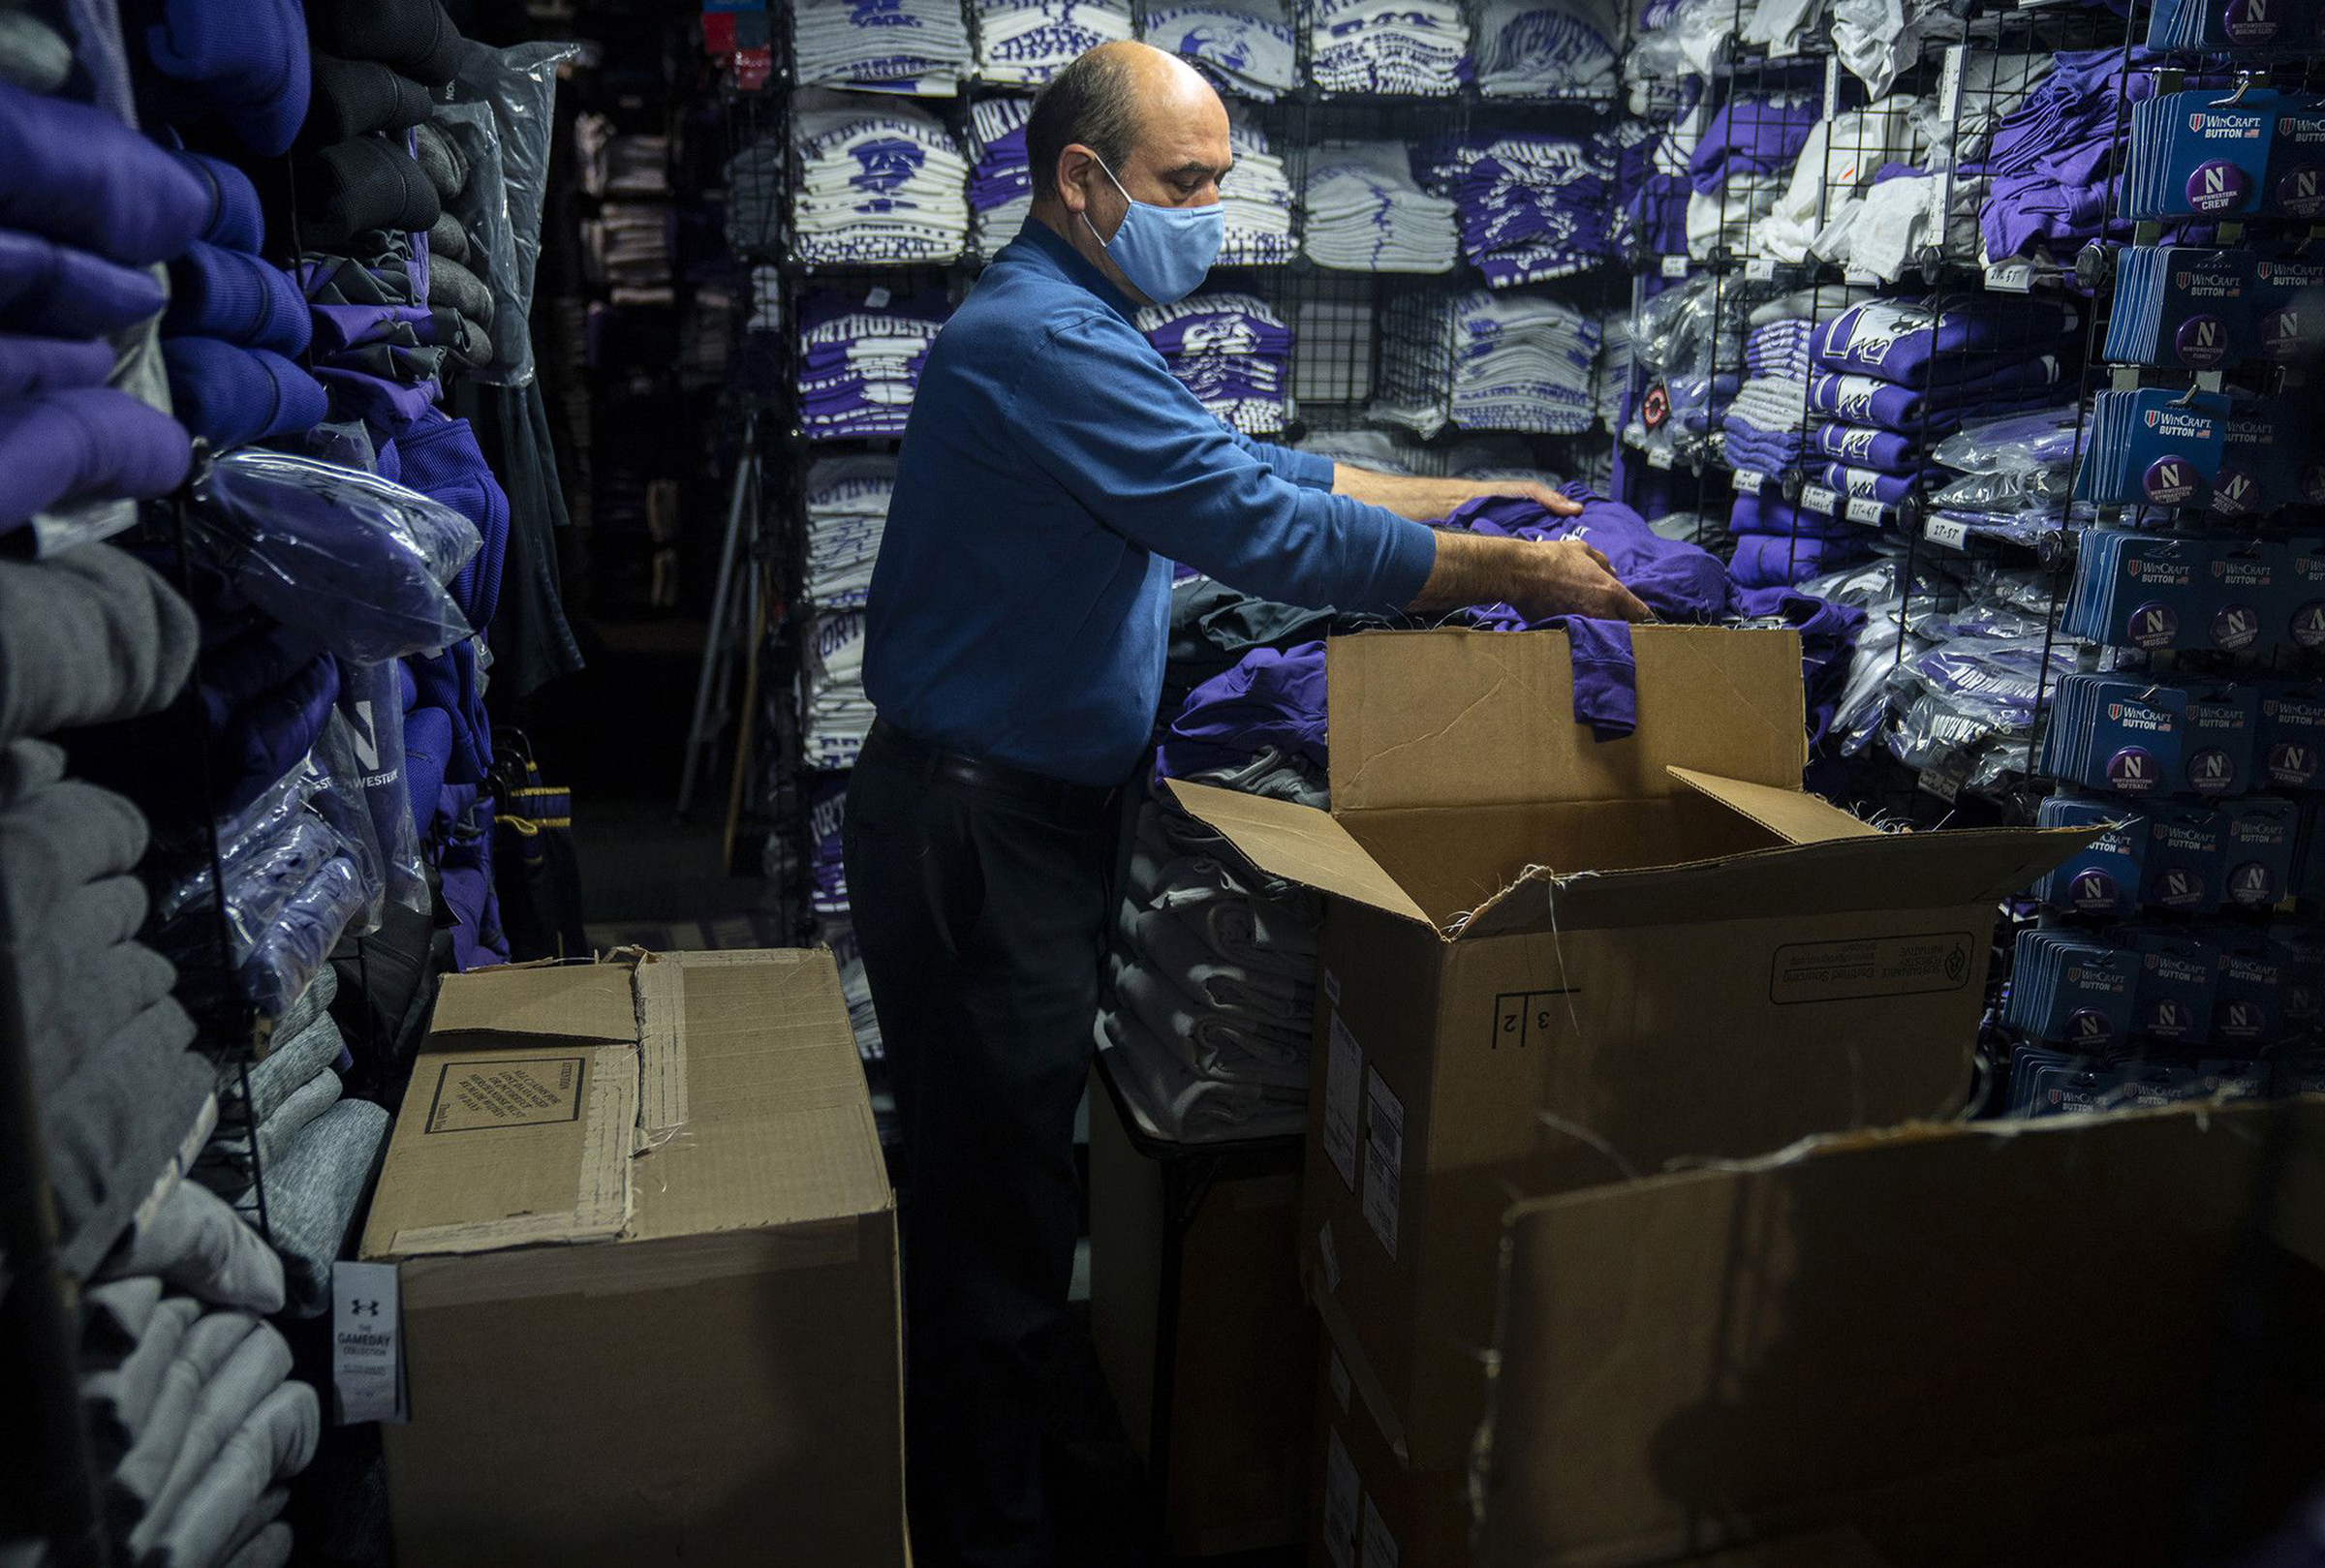 David Haghnaji, owner of Campus Gear in downtown Evanston, Ill., stocks another of his locations—The Locker Room, across from Ryan Field—with new Northwestern gear on Oct. 15, 2020. (E. Jason Wambsgans—Chicago Tribune/TNS/Sipa USA)